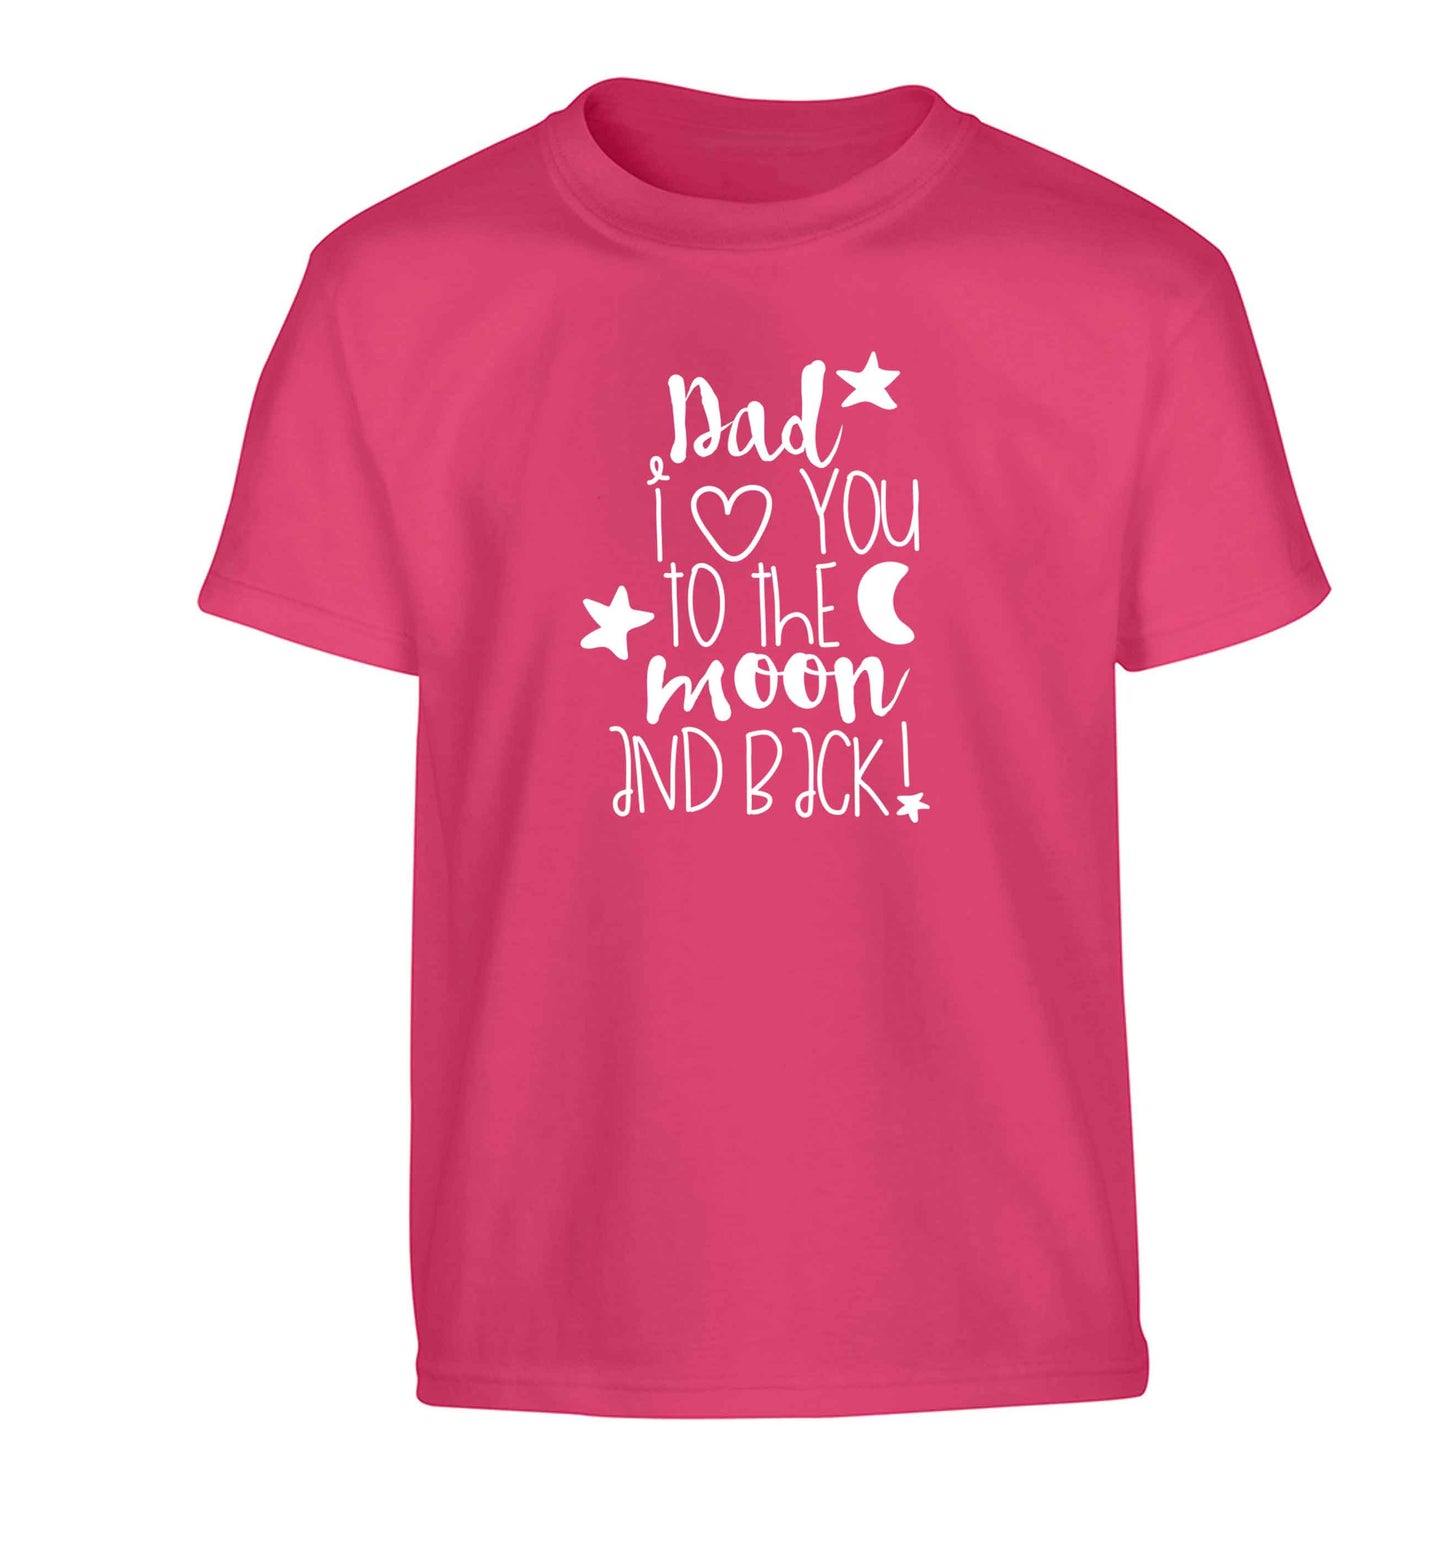 Dad I love you to the moon and back Children's pink Tshirt 12-13 Years